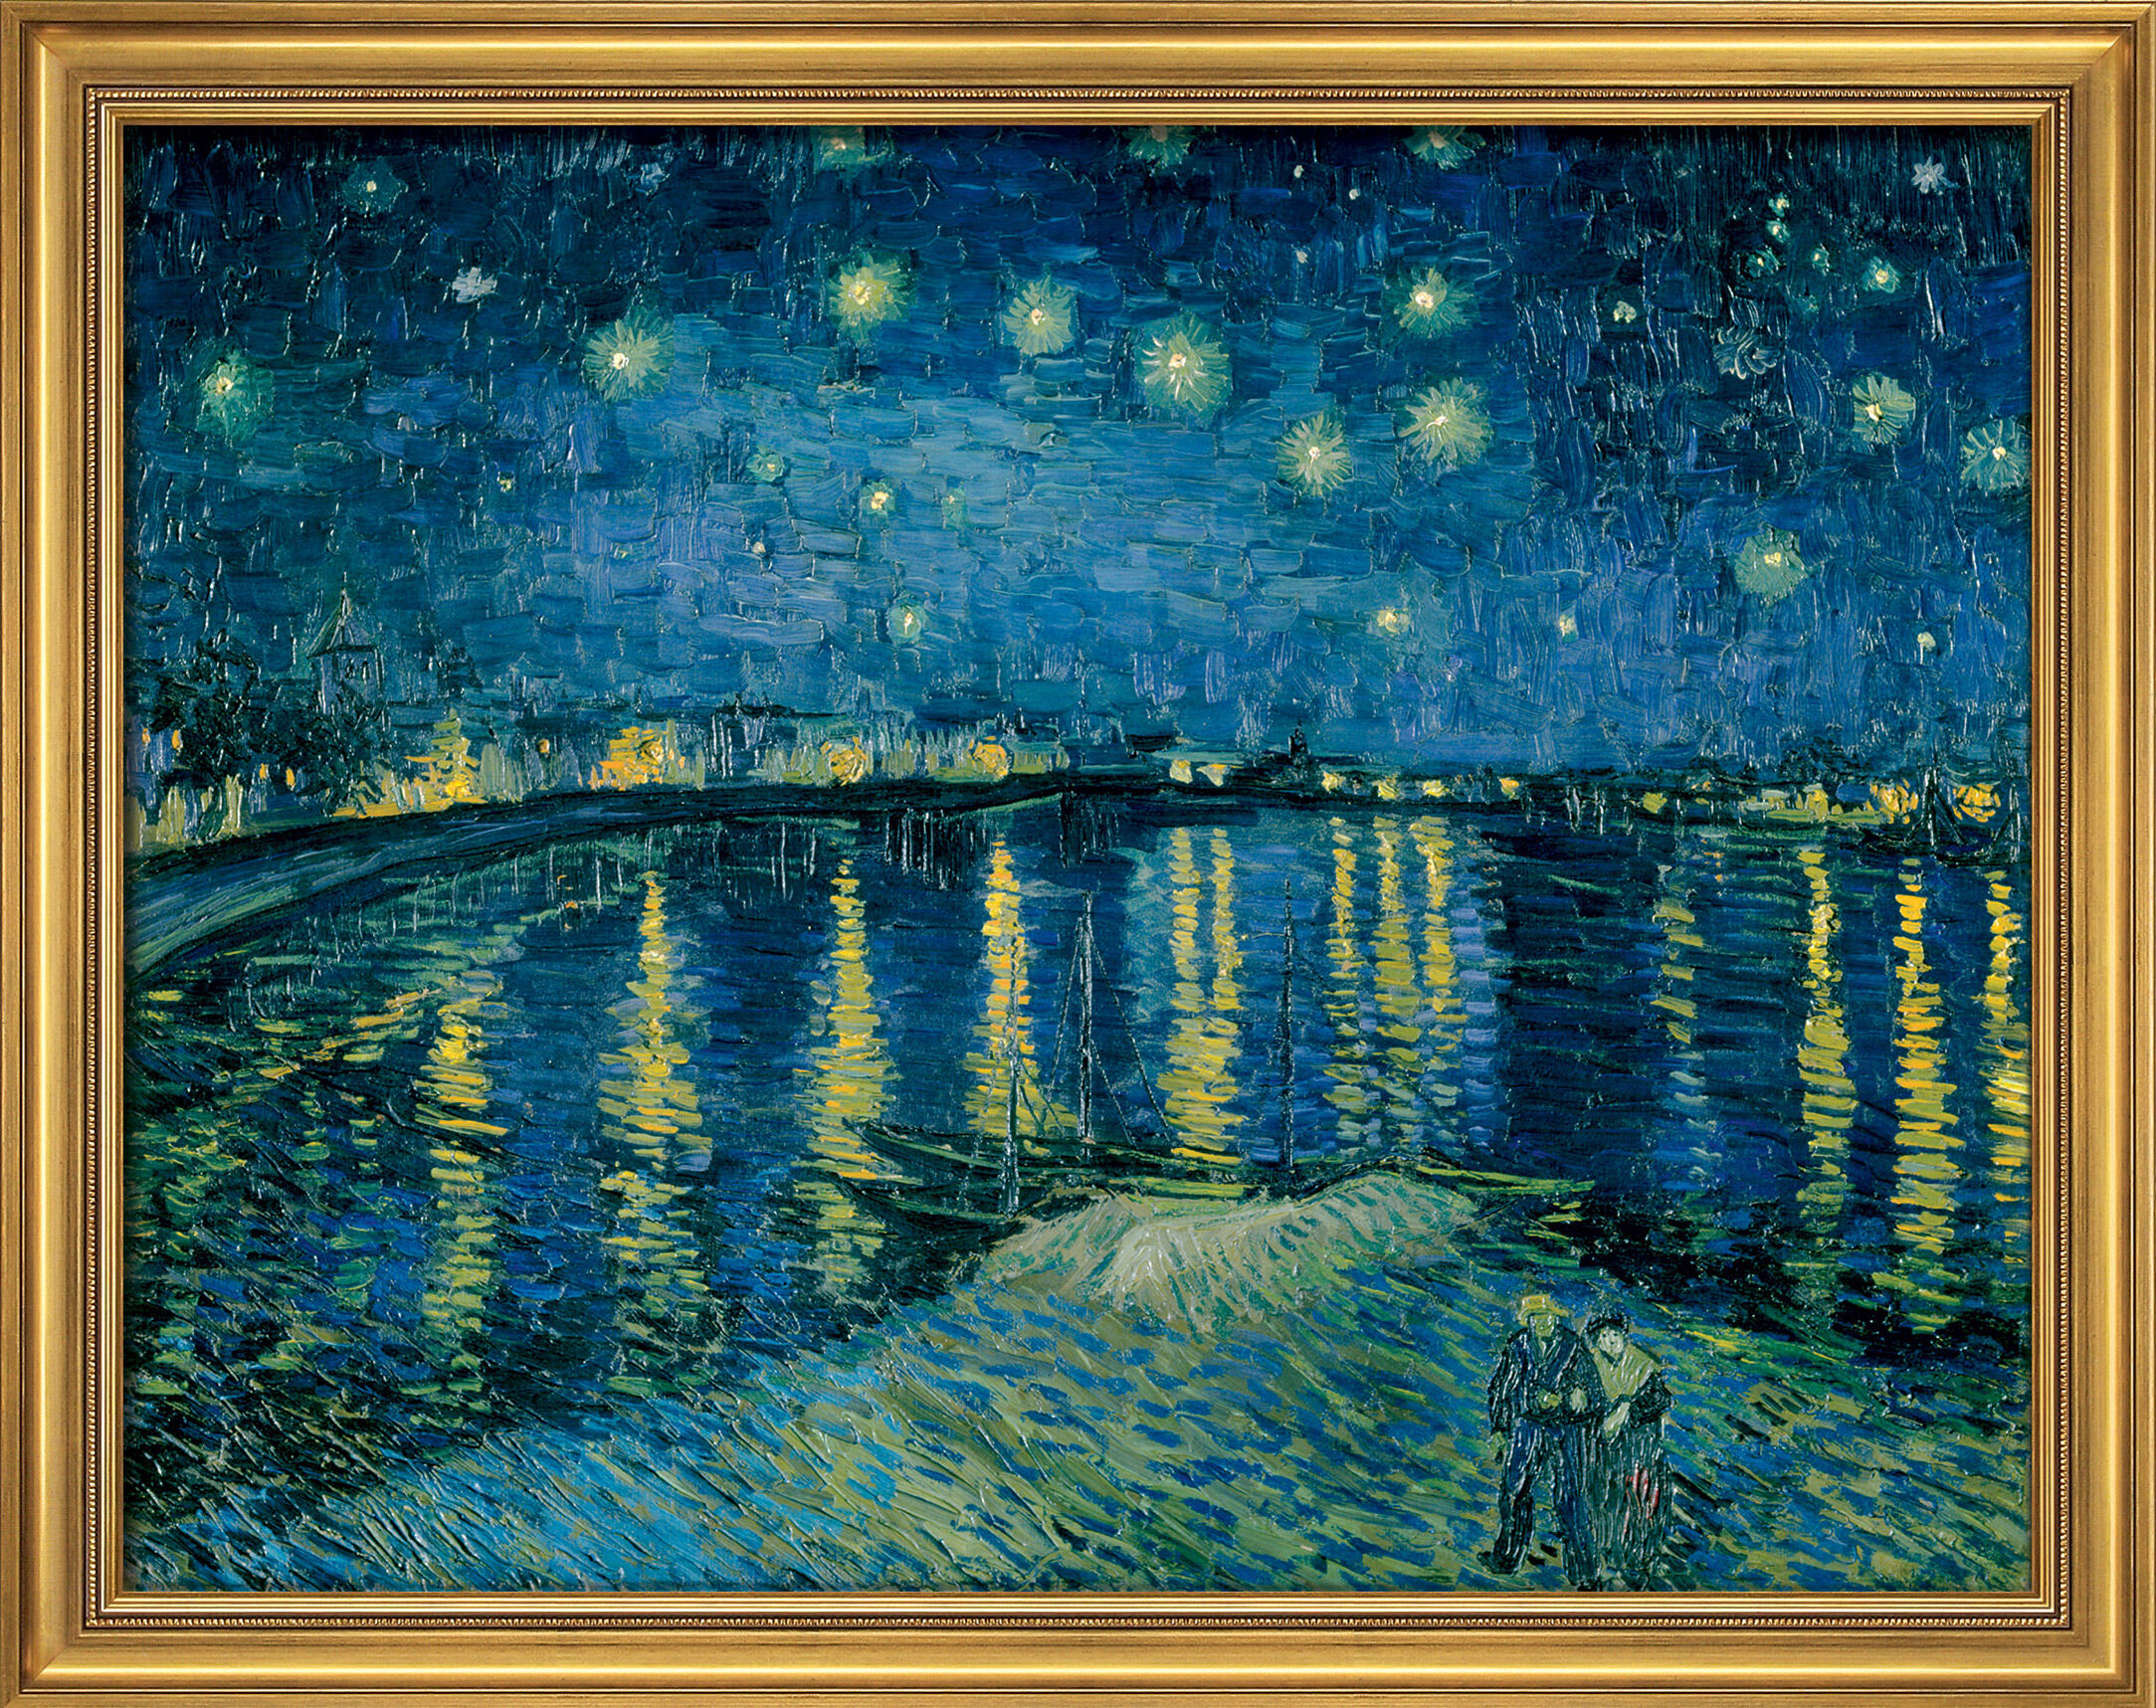 Picture "Starry Night Over the Rhône" (1888), framed by Vincent van Gogh